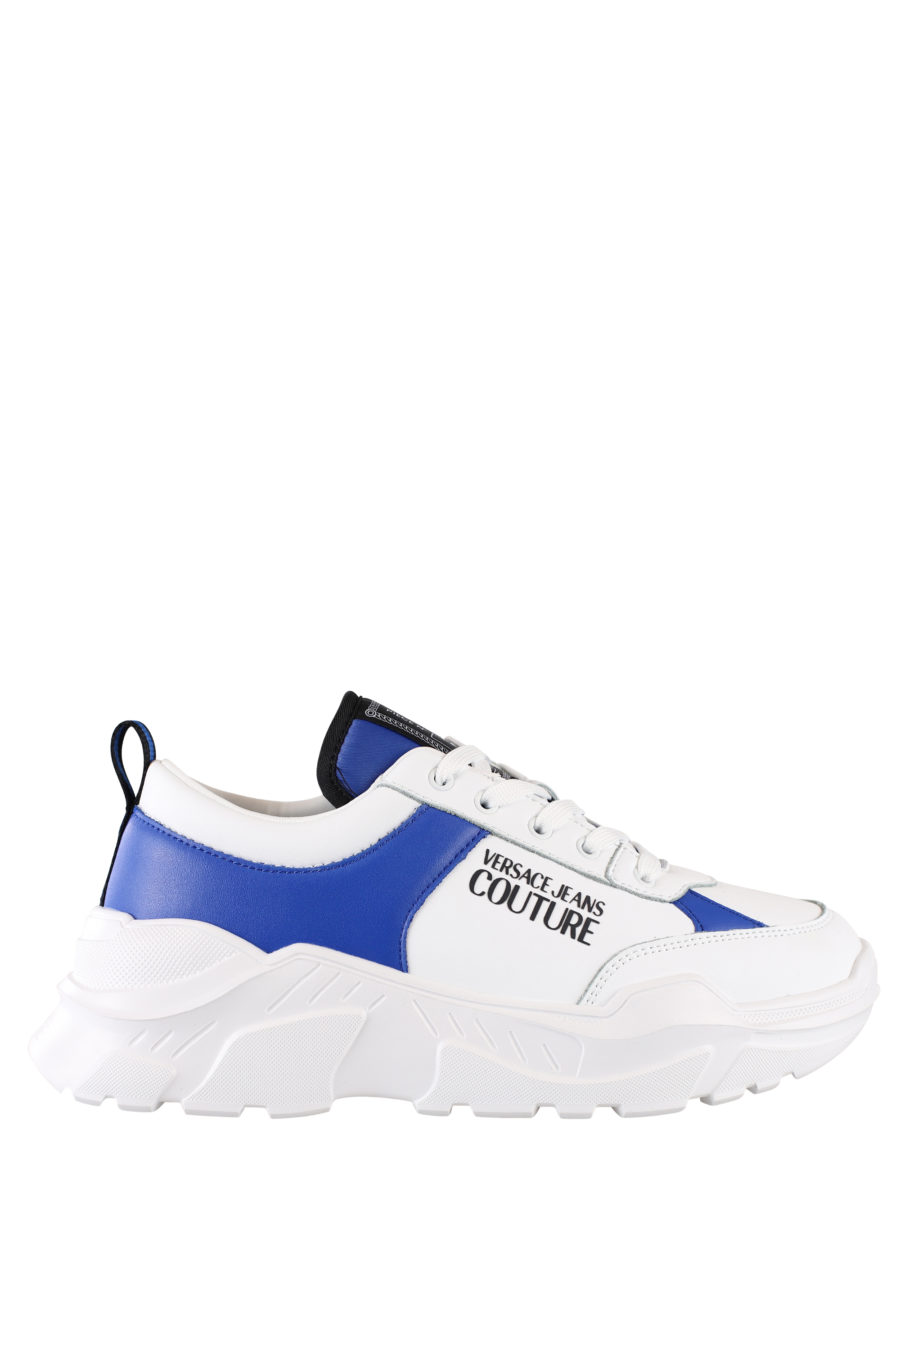 White and blue "Speedtrack" shoes - IMG 1936